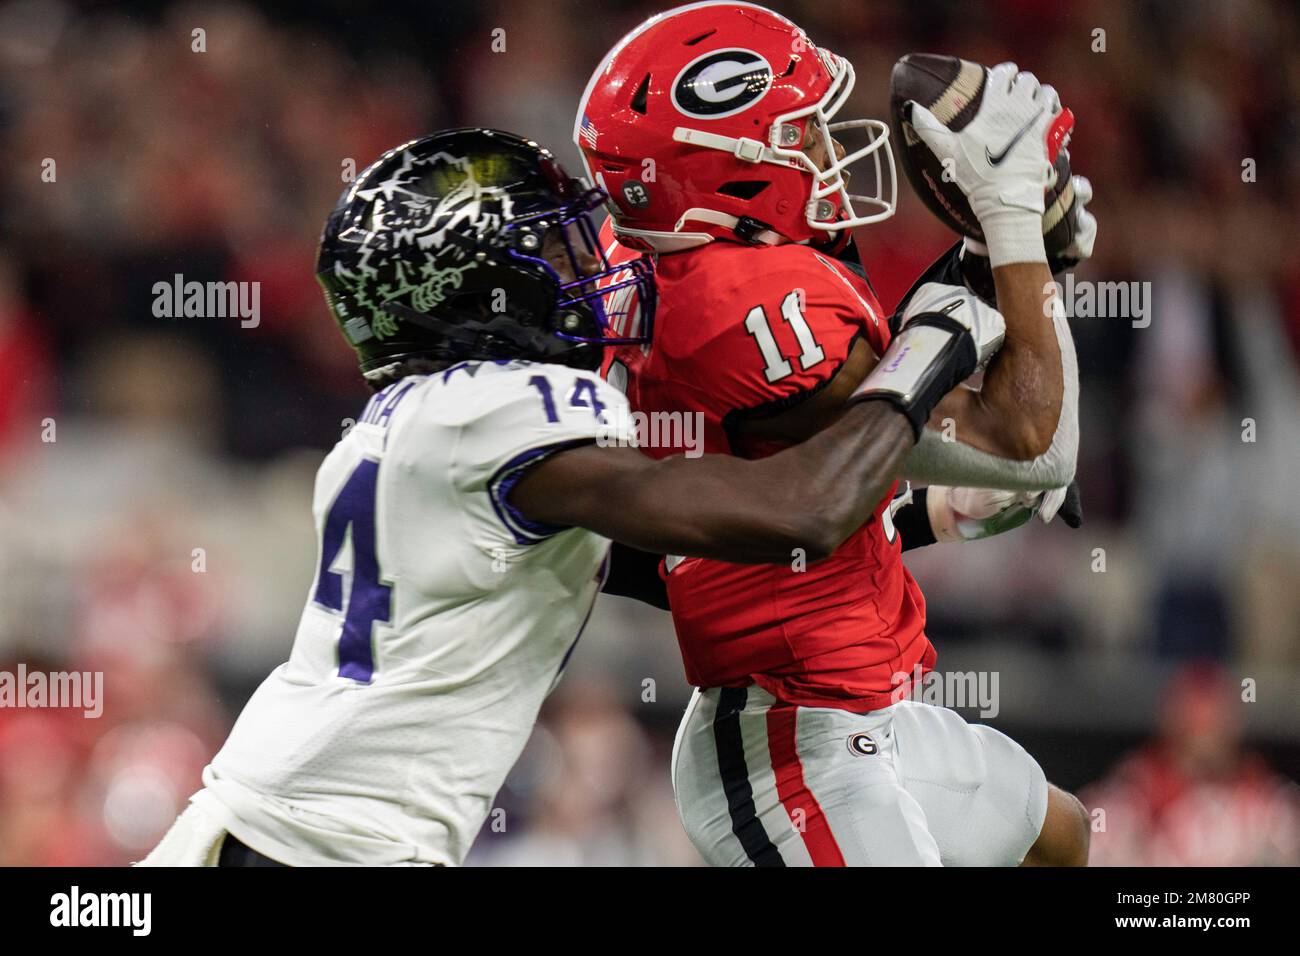 Georgia Bulldogs wide receiver Arian Smith (11) makes a catch against TCU Horned Frogs safety Abraham Camara (14) during the College Football Playoff Stock Photo